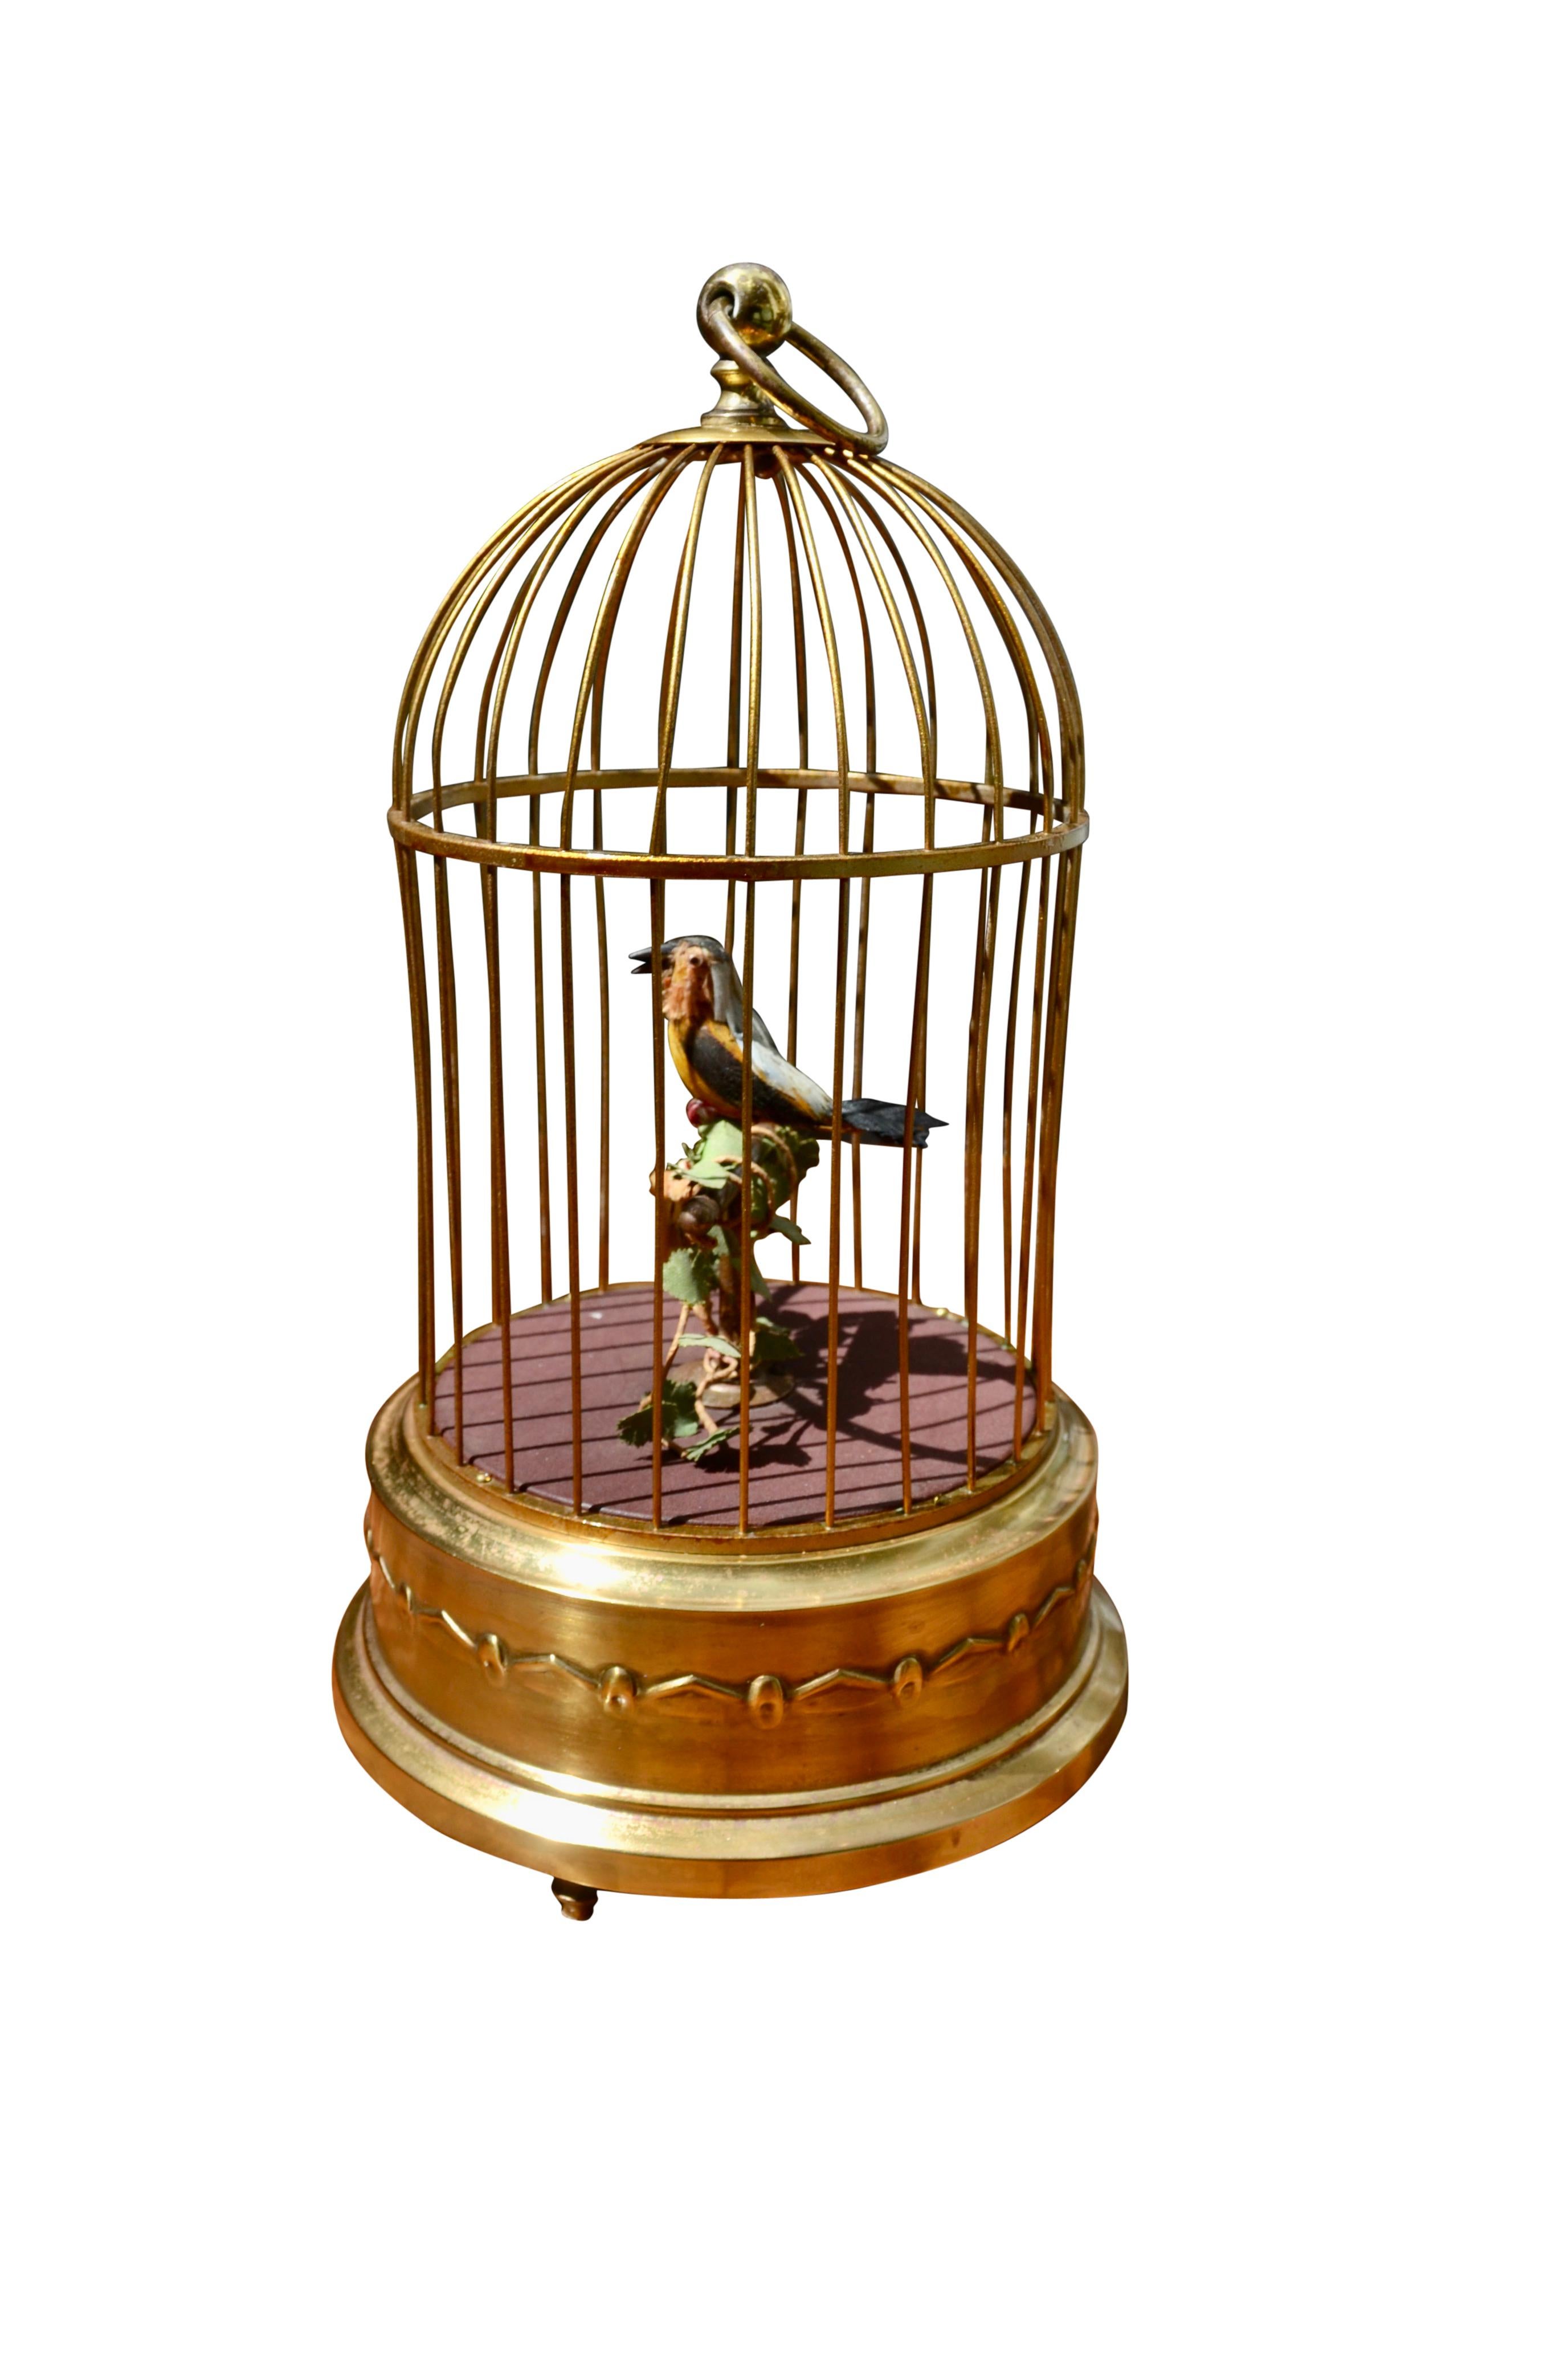 THis 1950's German made Brass Musical bird cage automaton features a colourful feathered bird perched on a brass stand with foliage atop a brown velvet base. The underside houses the fixed in place winding key and on off lever. Upon winding of the